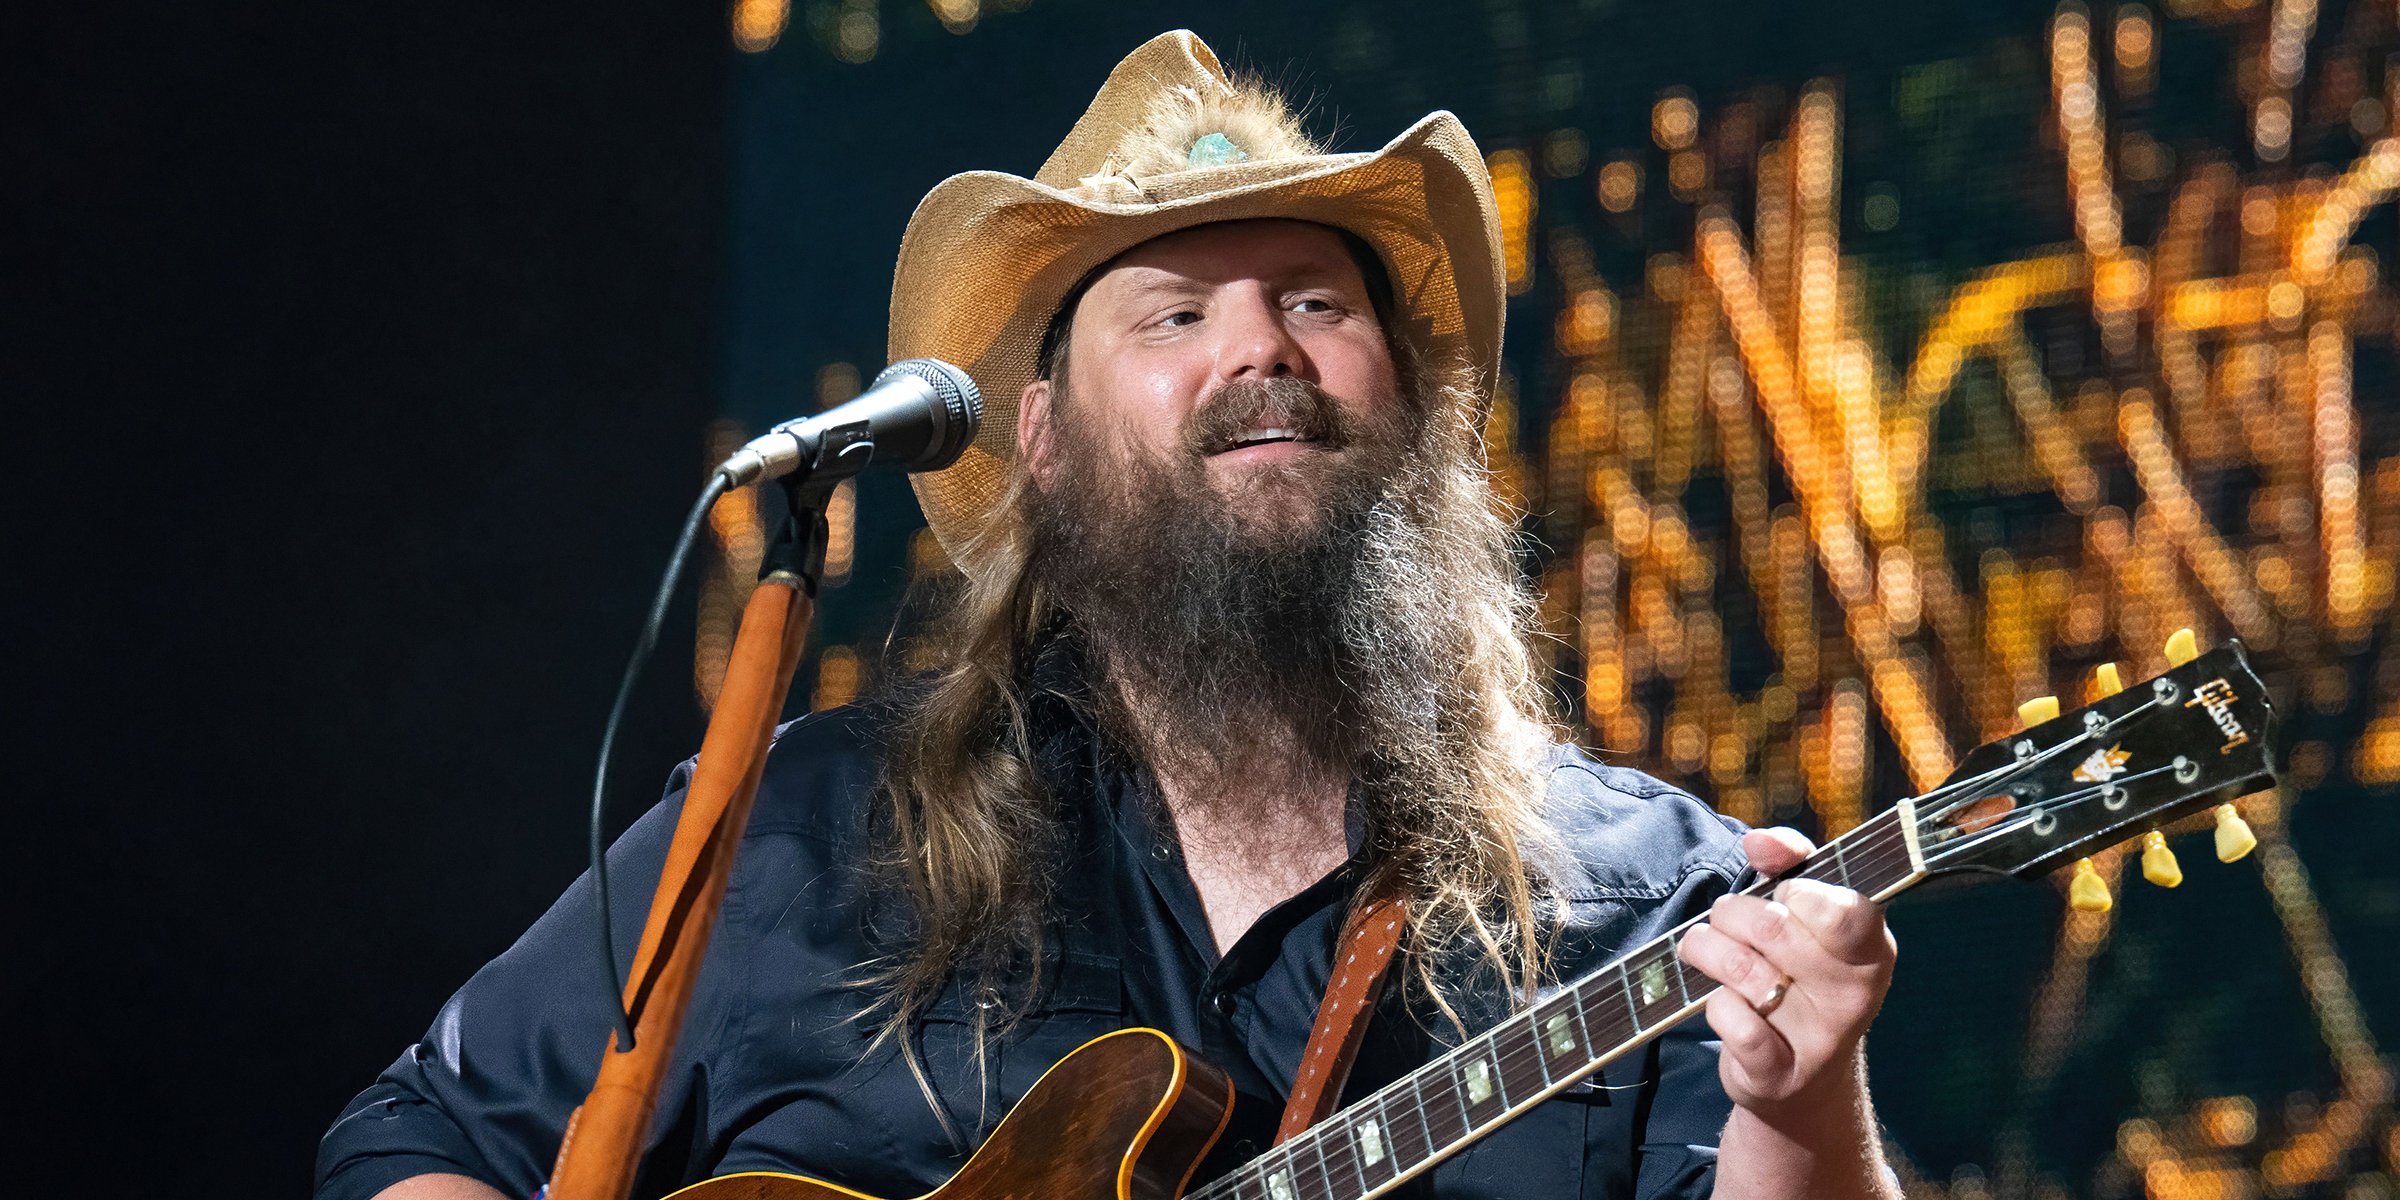 Chris Stapleton | Source: Getty images